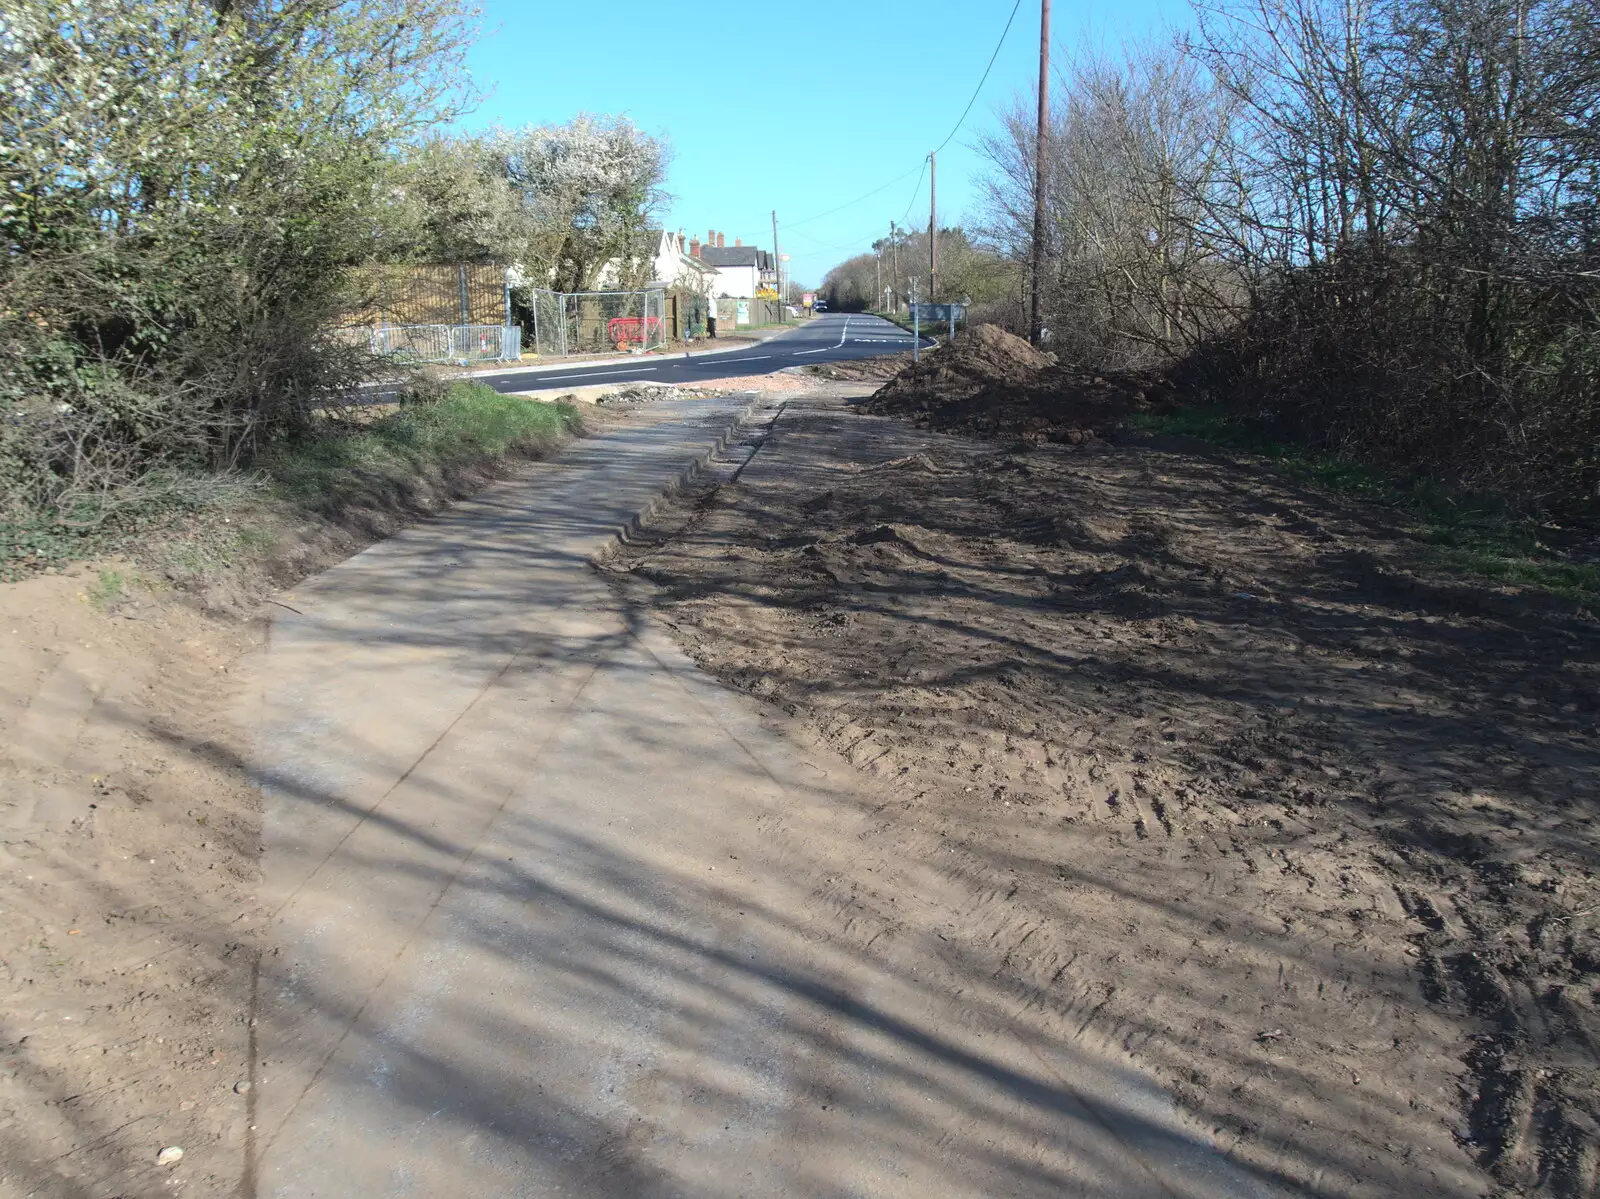 The new/old bike lane again, from Roadworks and Harry's Trampoline, Brome, Suffolk - 6th April 2021